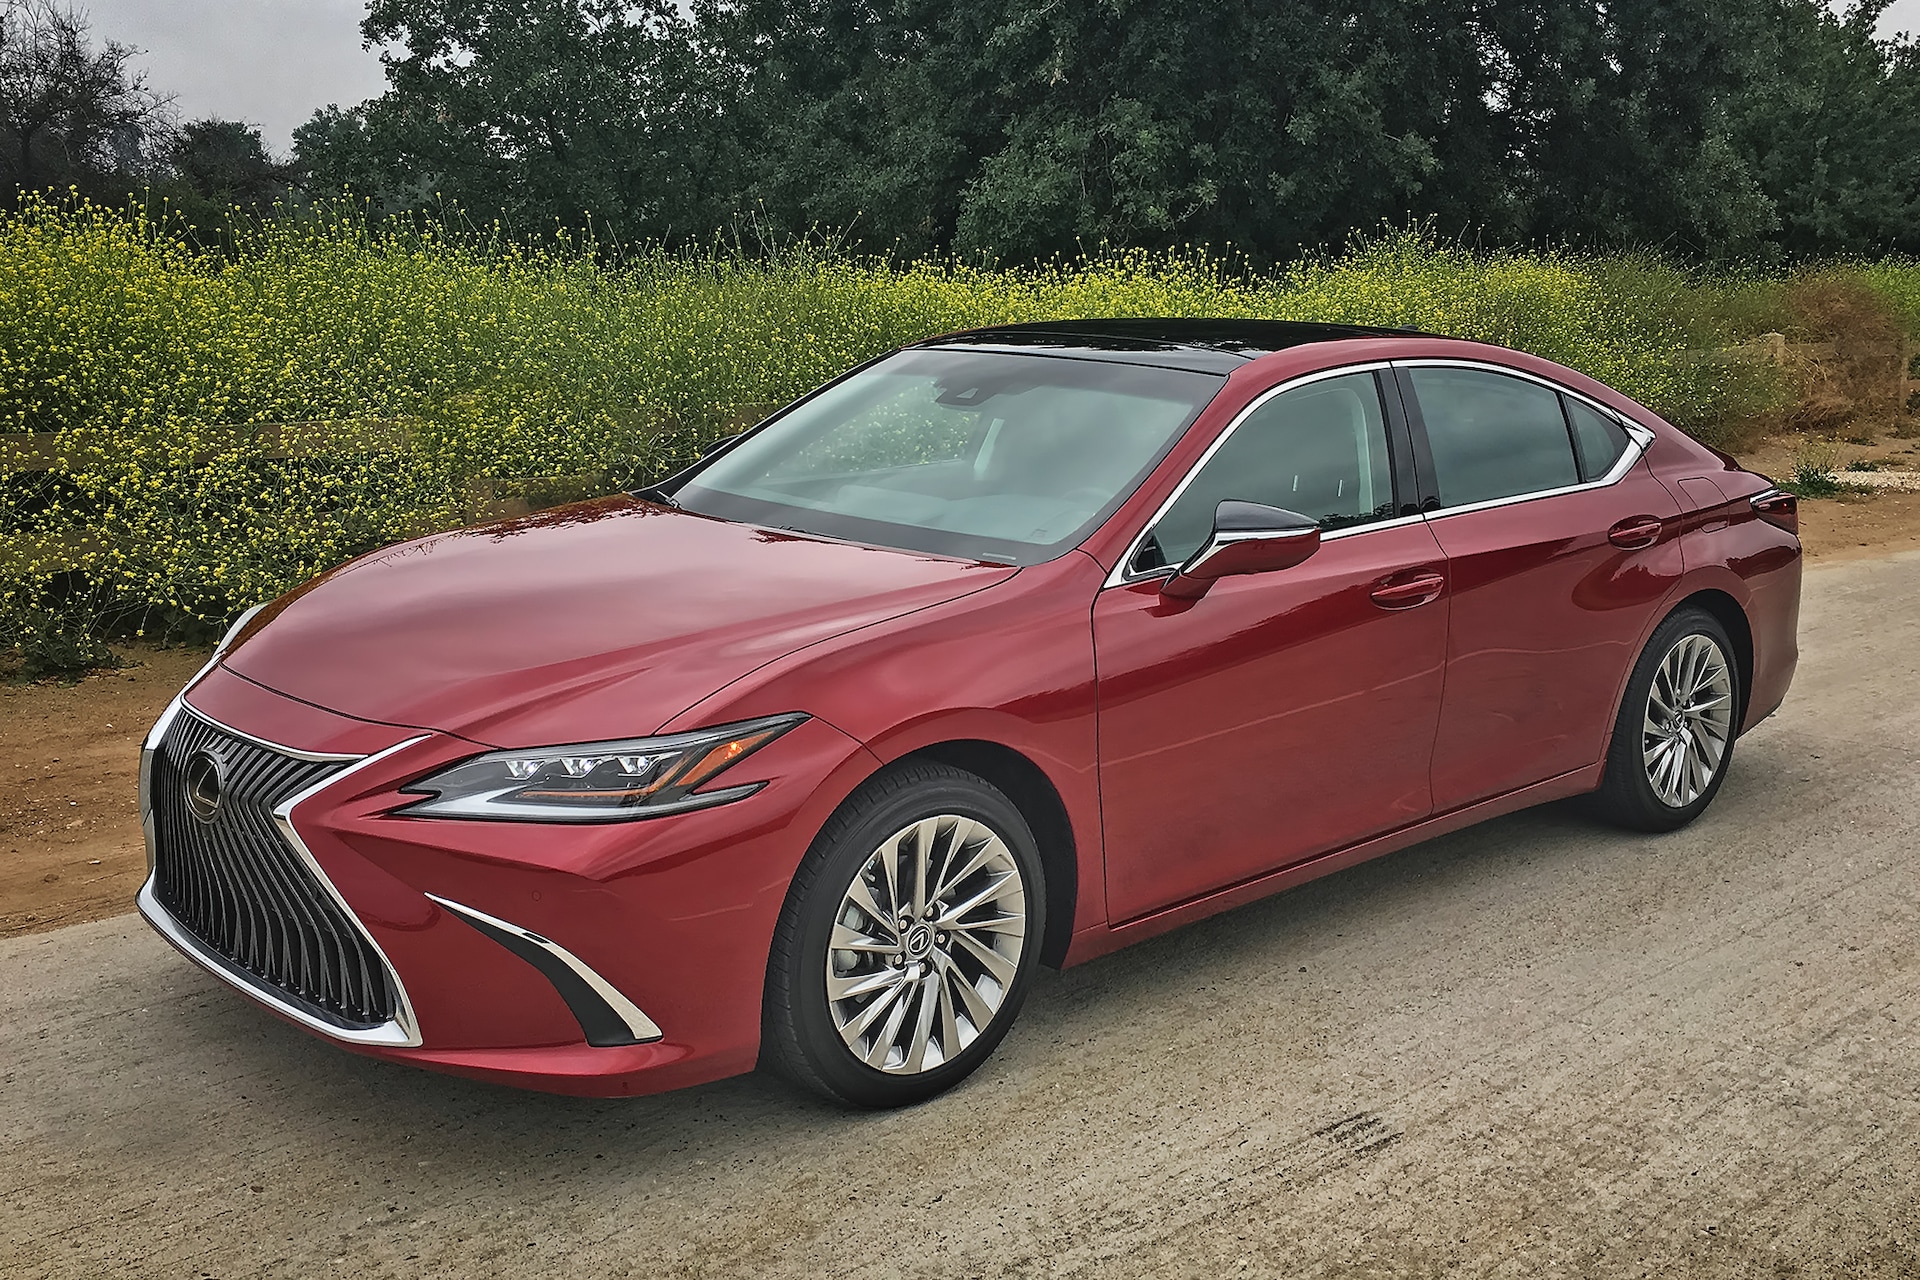 2019 Lexus ES350 Review: Reveling in the Sound of Silence